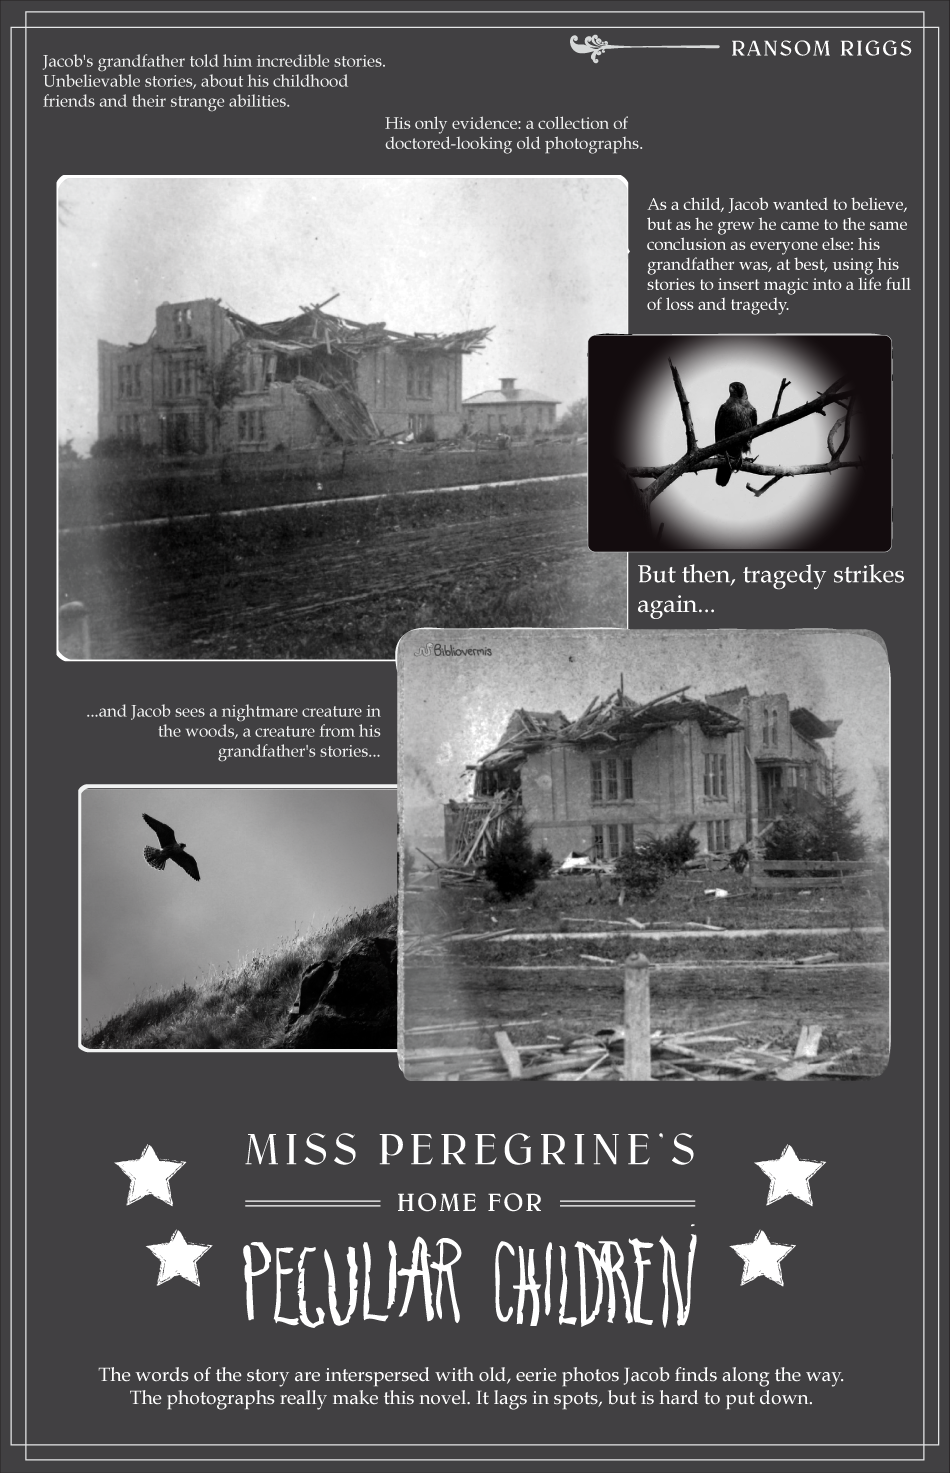 Miss Peregrine’s Home for Peculiar Children. Ransom Riggs. Book Review: Jacob's grandfather told him incredible stories. Unbelievable stories, about his childhood and friends with strange abilities. His only evidence: a collection of strange, old photographs. As a child, Jacob wanted to believe, but as he grew he came to the same conclusion as everyone else: his grandfather was, at best, using his stories to insert magic into a life full of loss and tragedy. [Black and white photographs show a destroyed building and a falcon.] But then, tragedy strikes again, and Jacob sees a nightmare creature in the woods, a creature from his grandfather's stories... [Black and white photographs show the destroyed building from another angle and a falcon in flight.] The words of the story are interspersed with old, eerie photos Jacob finds along the way. The photographs really make this novel, which is hard to put down.